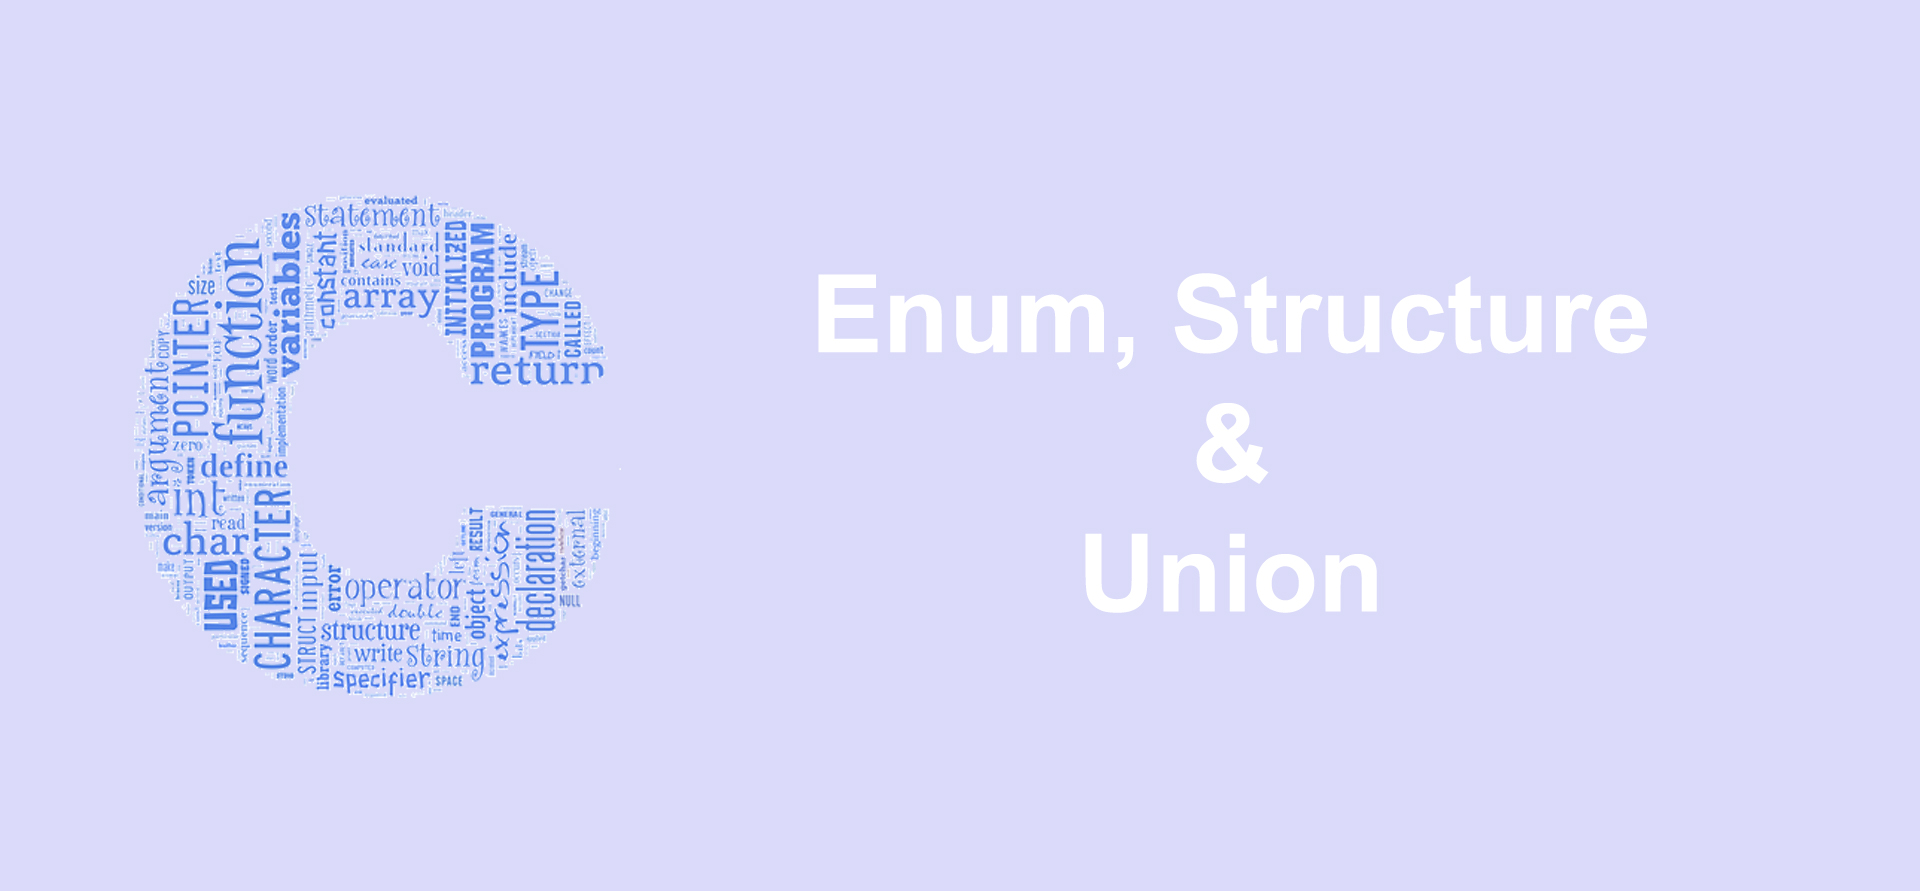 Enums, Structures, and Unions in C Programming